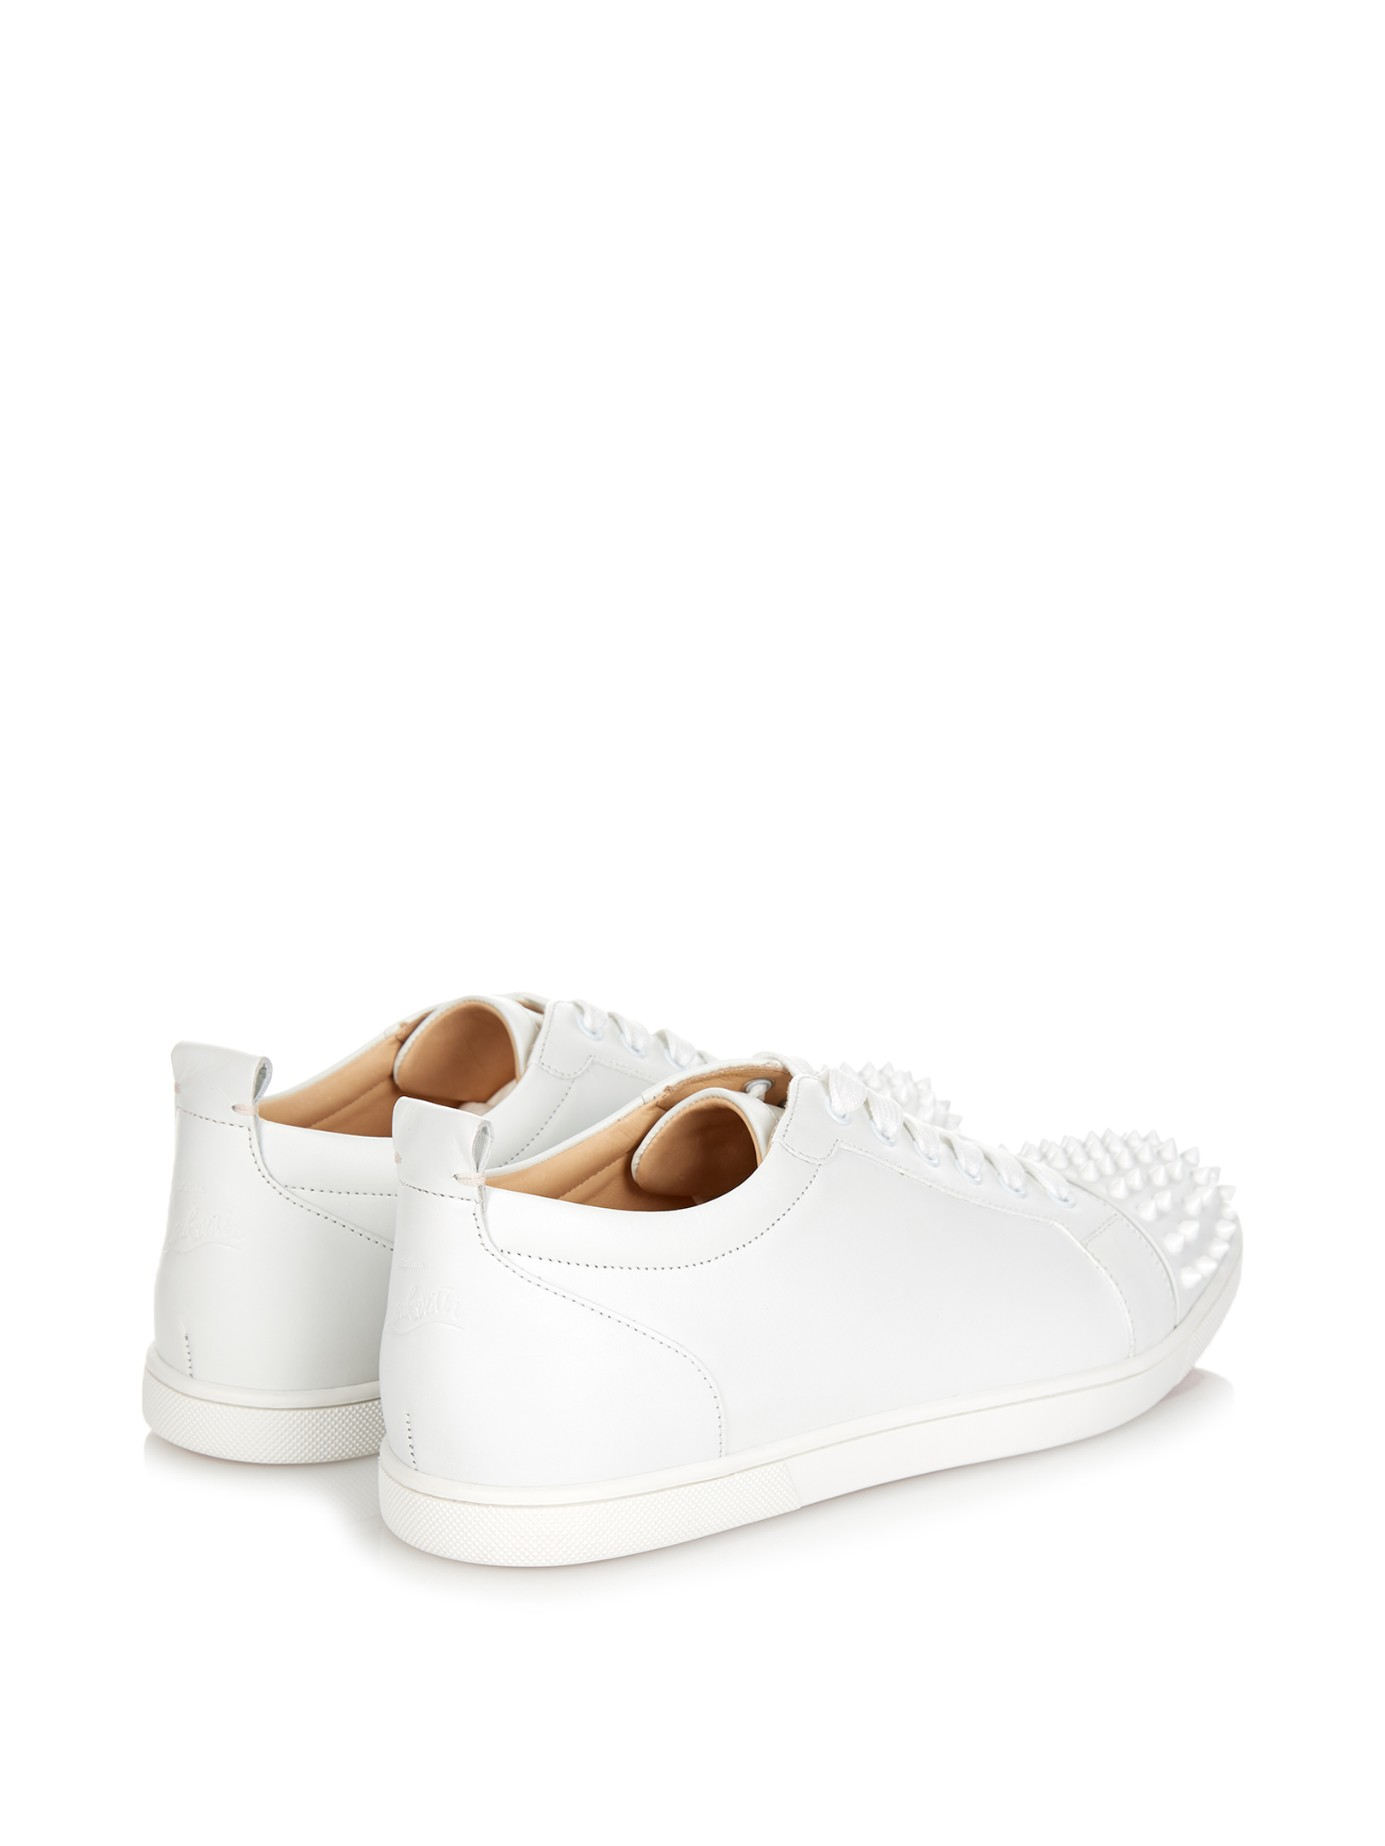 Christian louboutin Gondolaclou Low-top Leather Trainers in White ...  